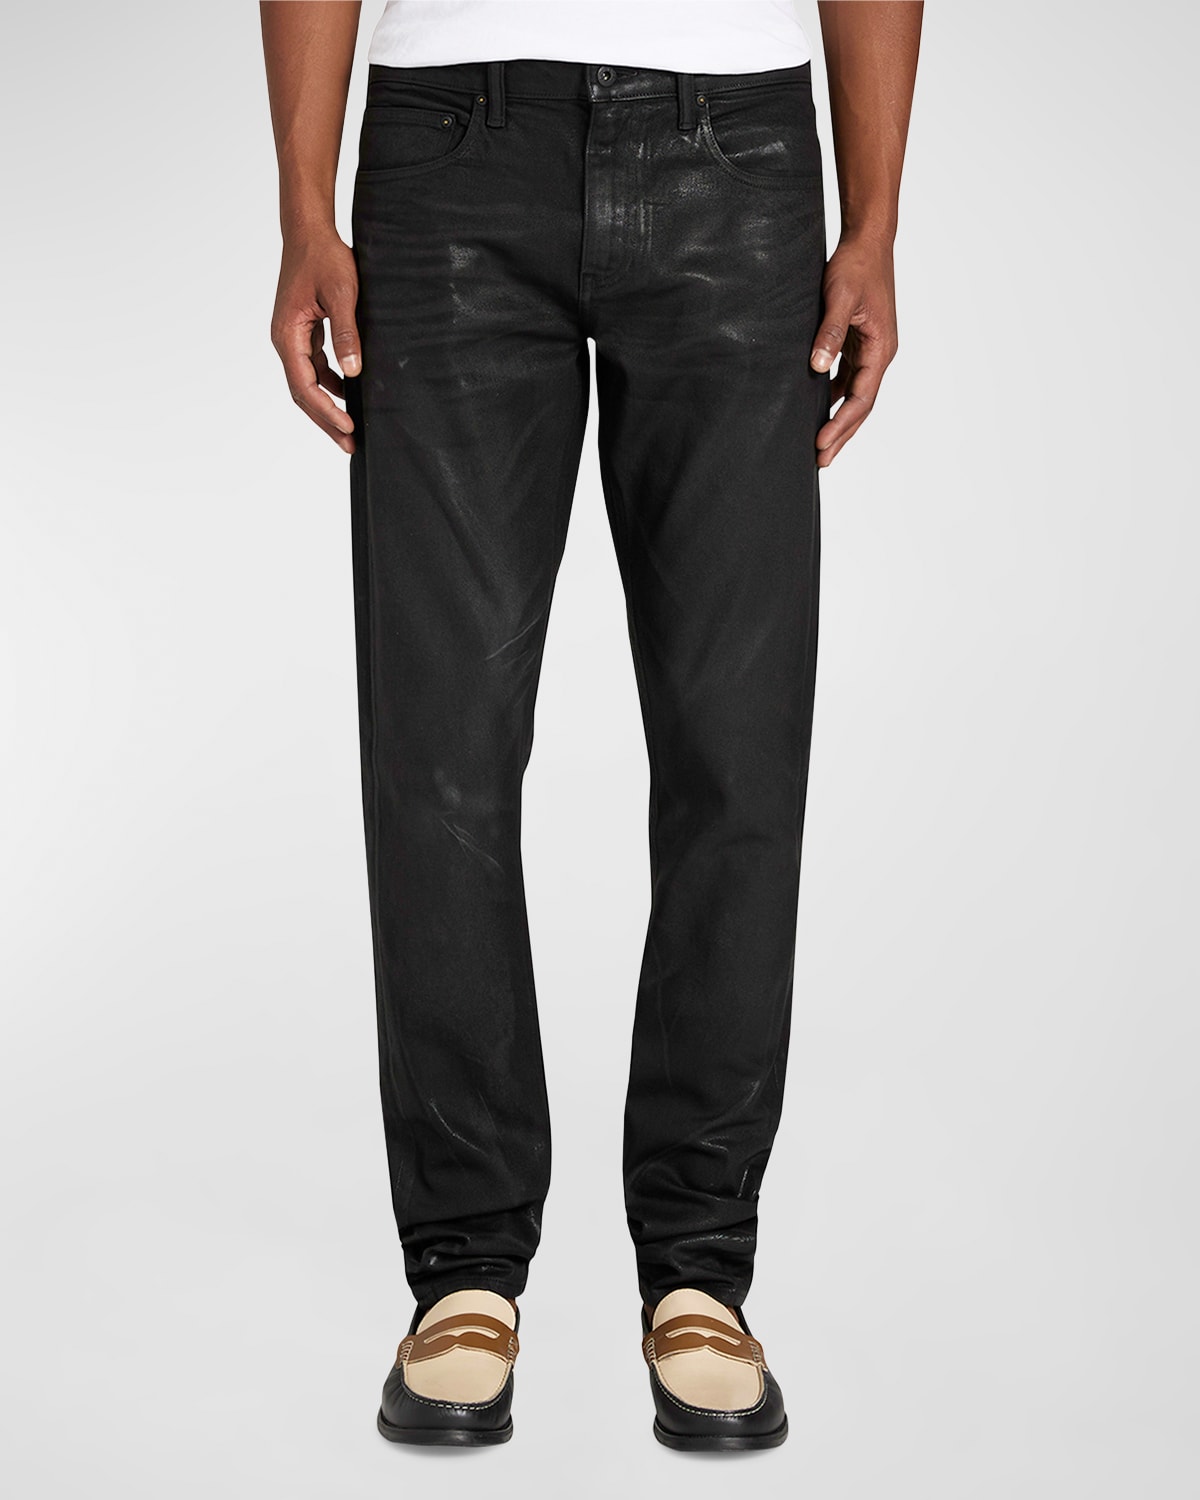 Prps Wax Mode Skinny Fit Jeans In Black